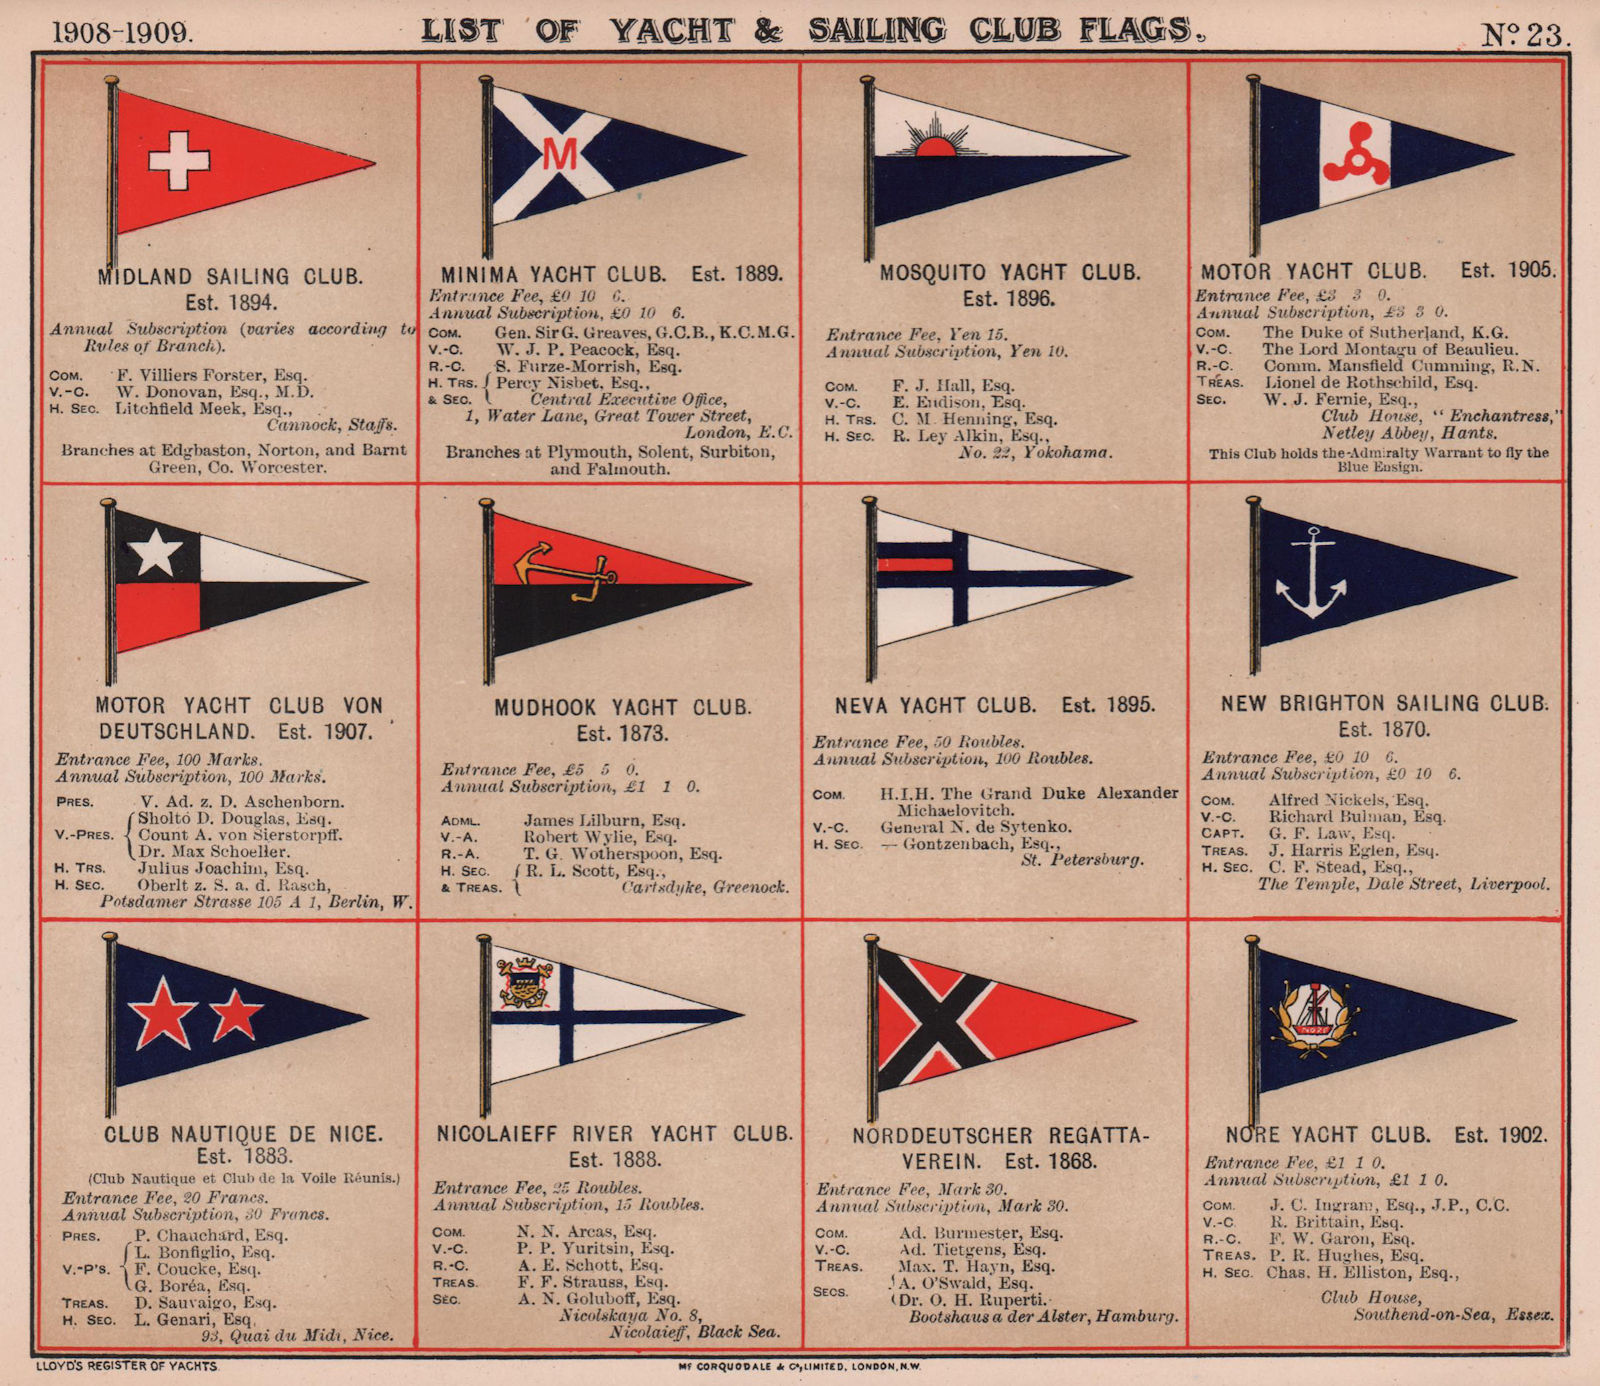 Associate Product YACHT & SAILING CLUB FLAGS M-N Midland Minima Mosquito Mudhook Nice Nore 1908